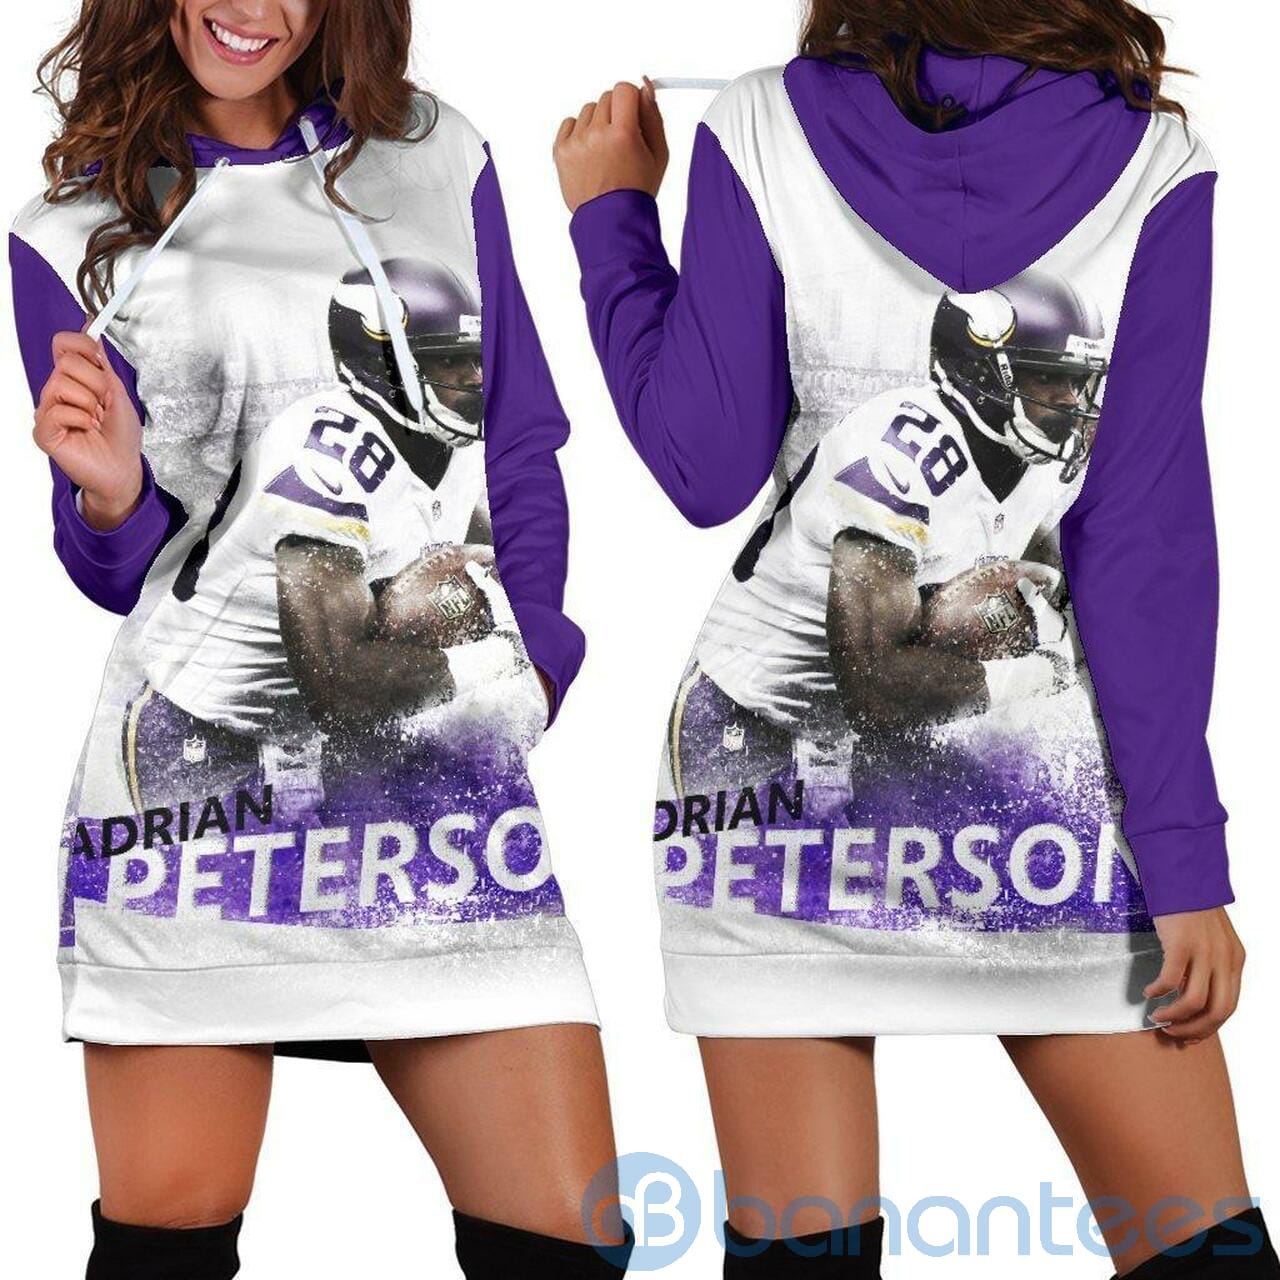 2 Hoodie Dress for Adrian Peterson Team Fans